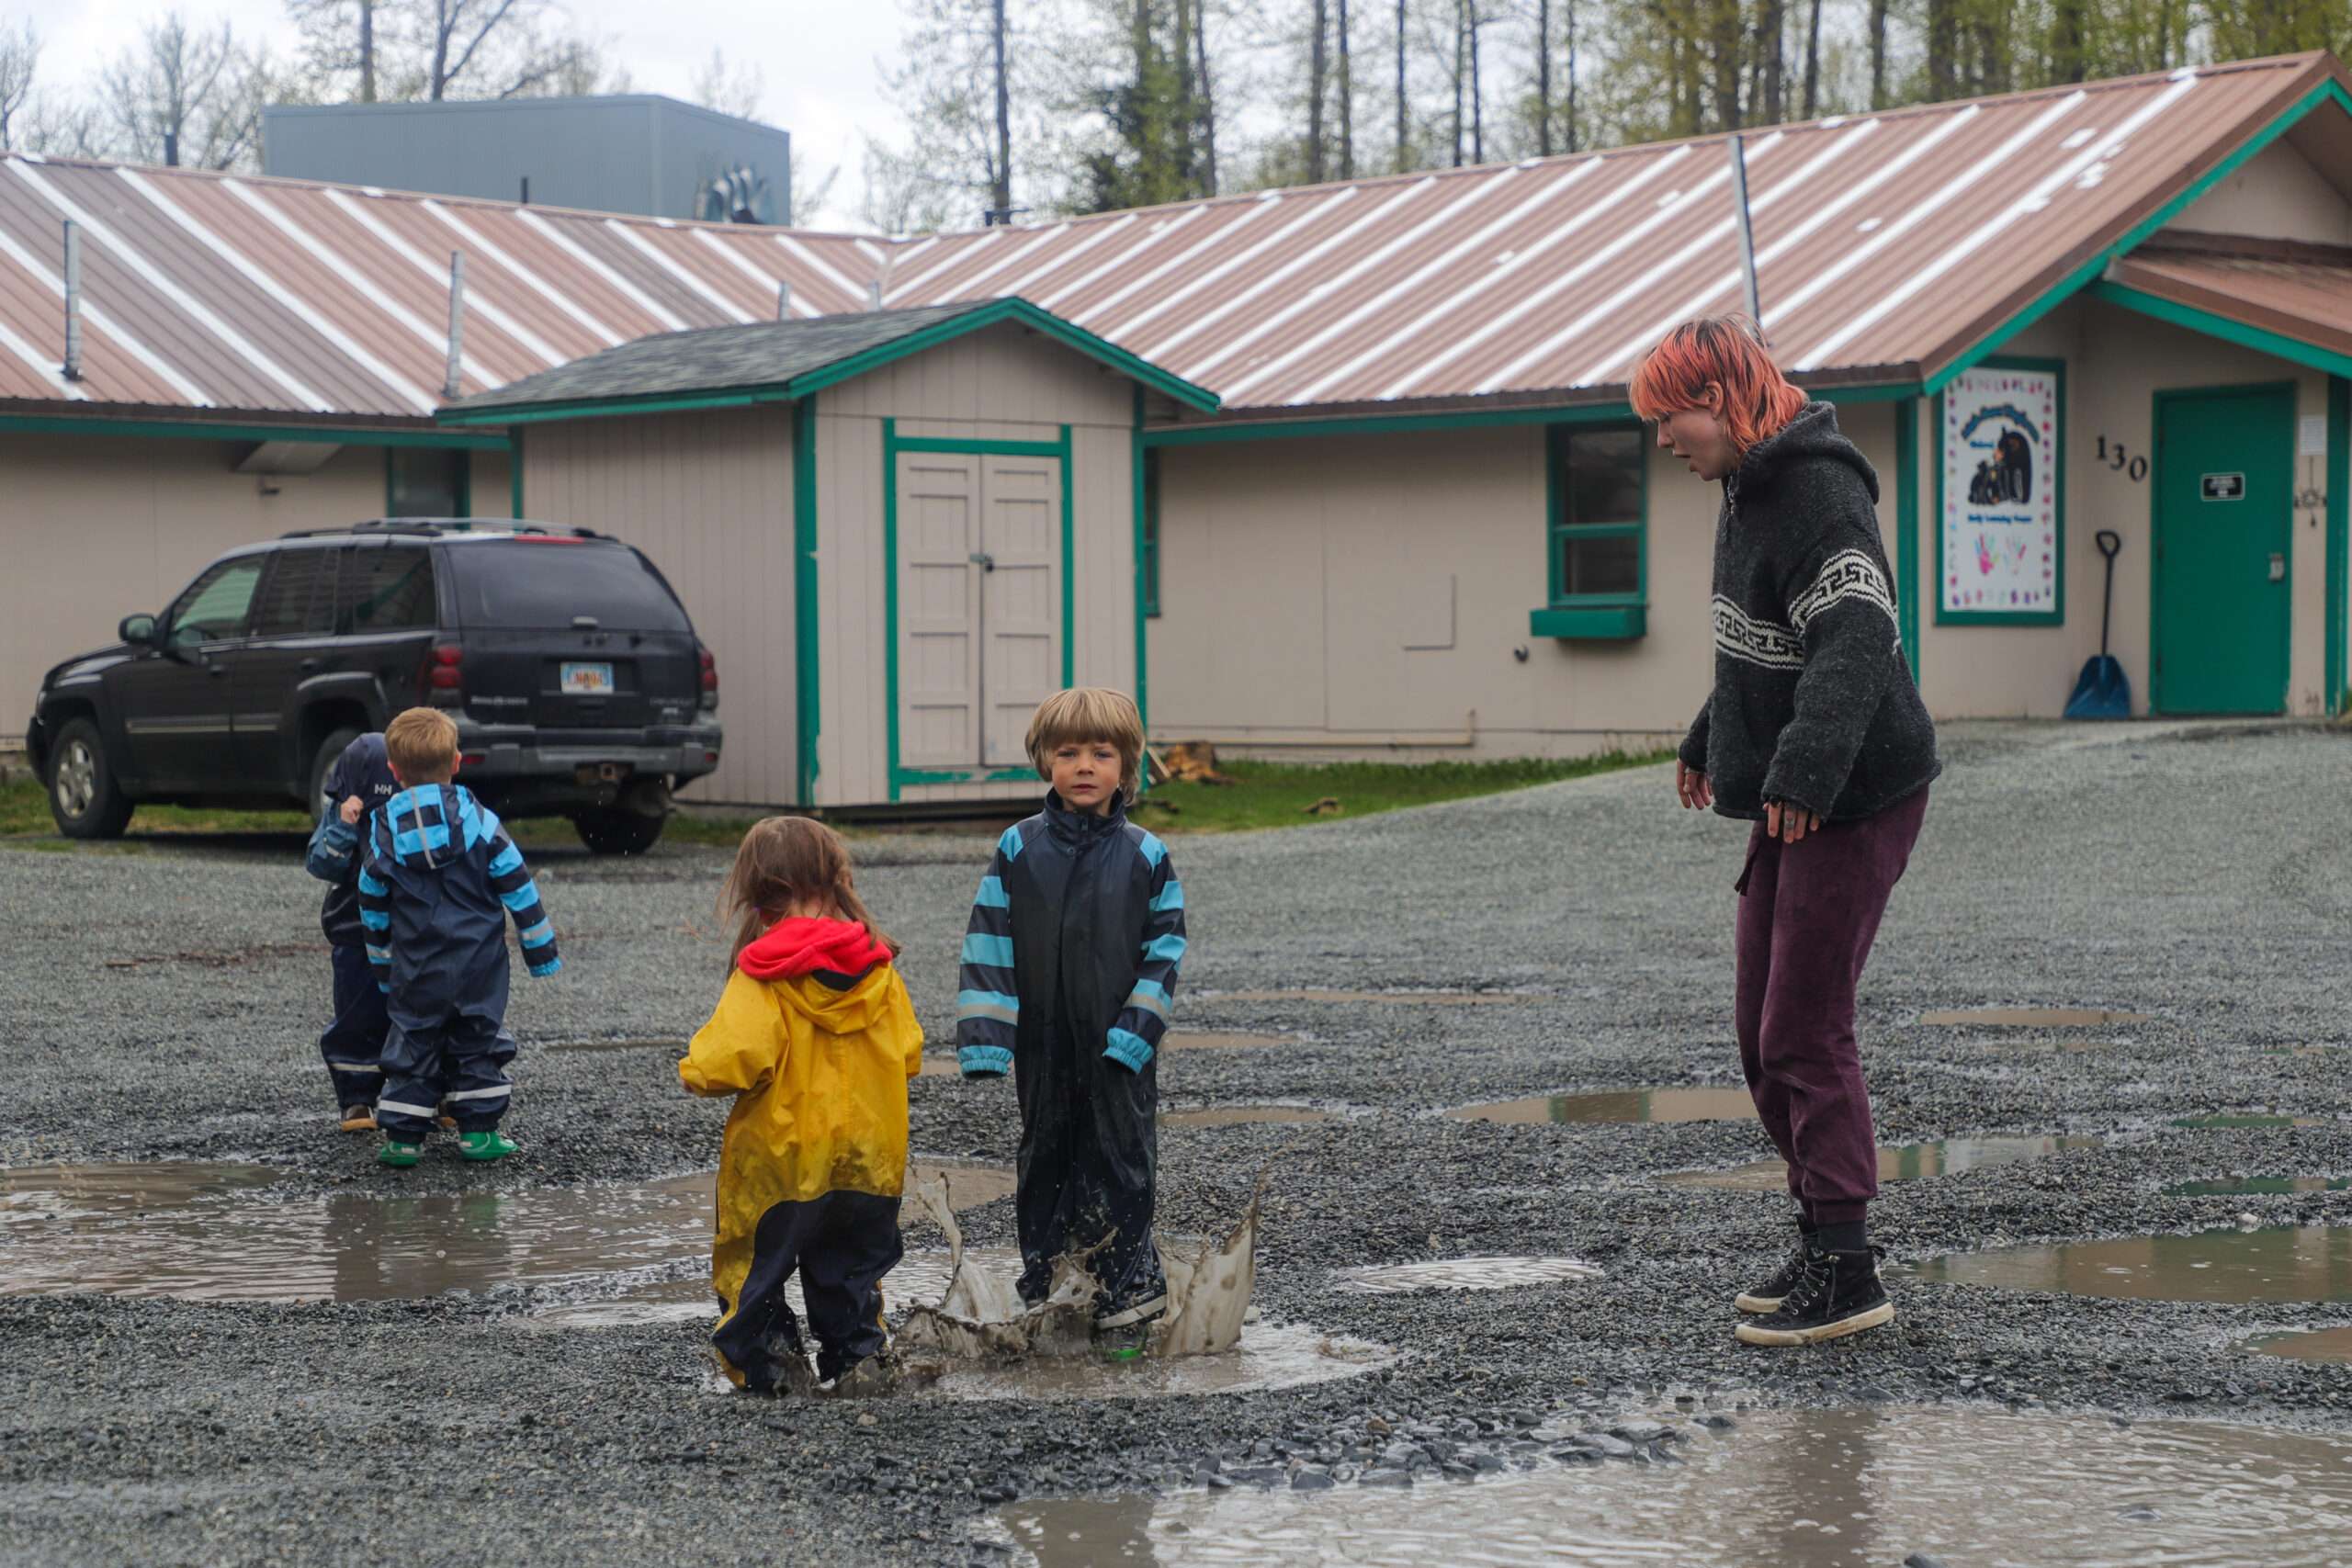 A person with dyed pink hair stands in a parking lot with four children who are splashing around in puddles.